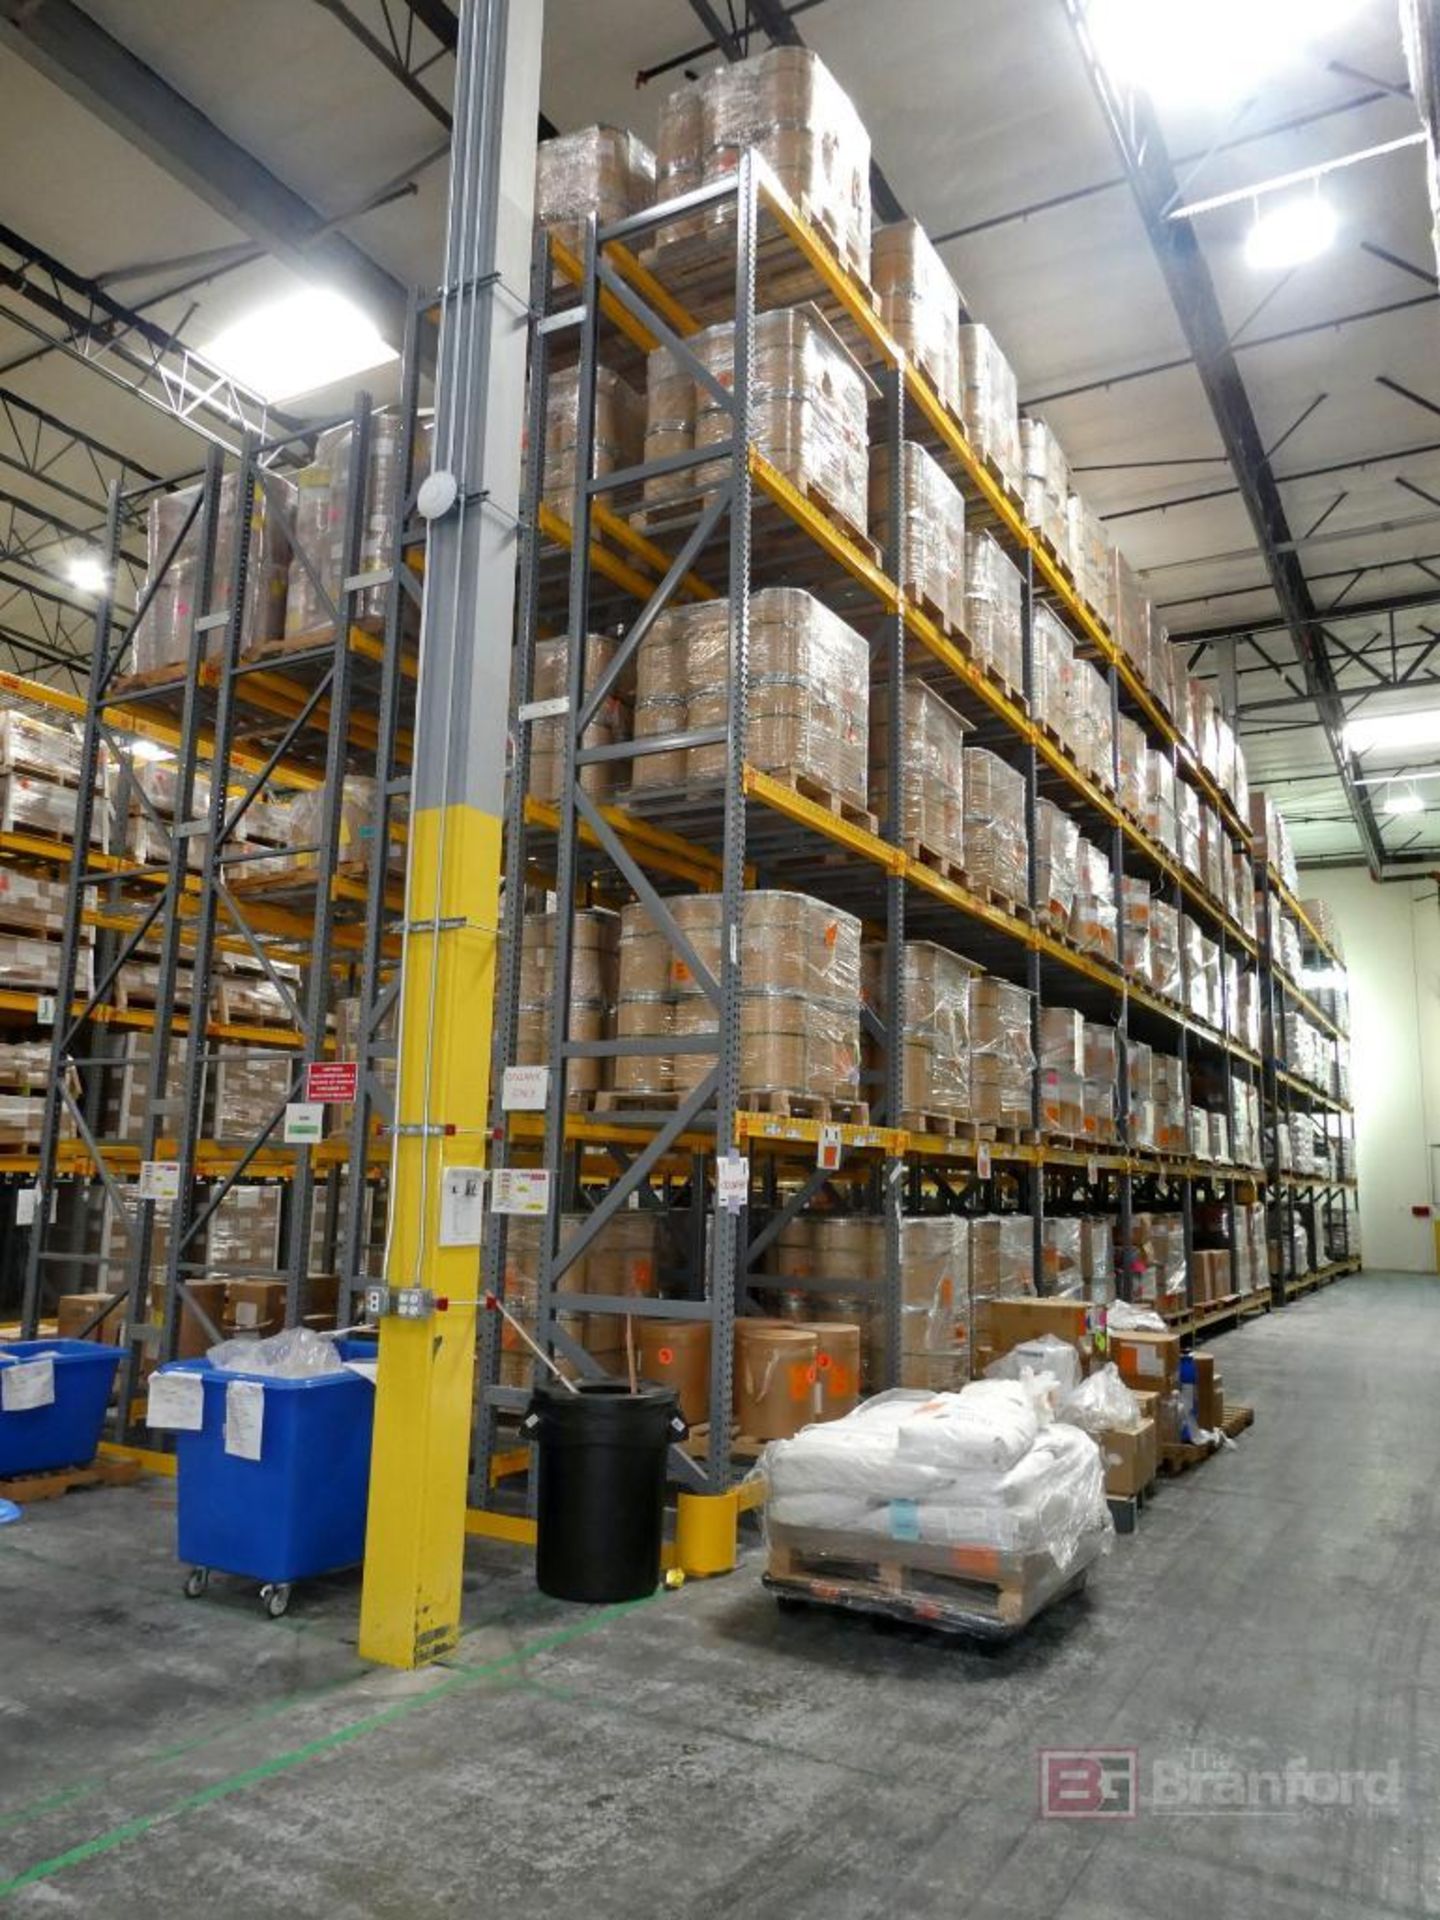 (47) Sections of Medium Duty Pallet Racking